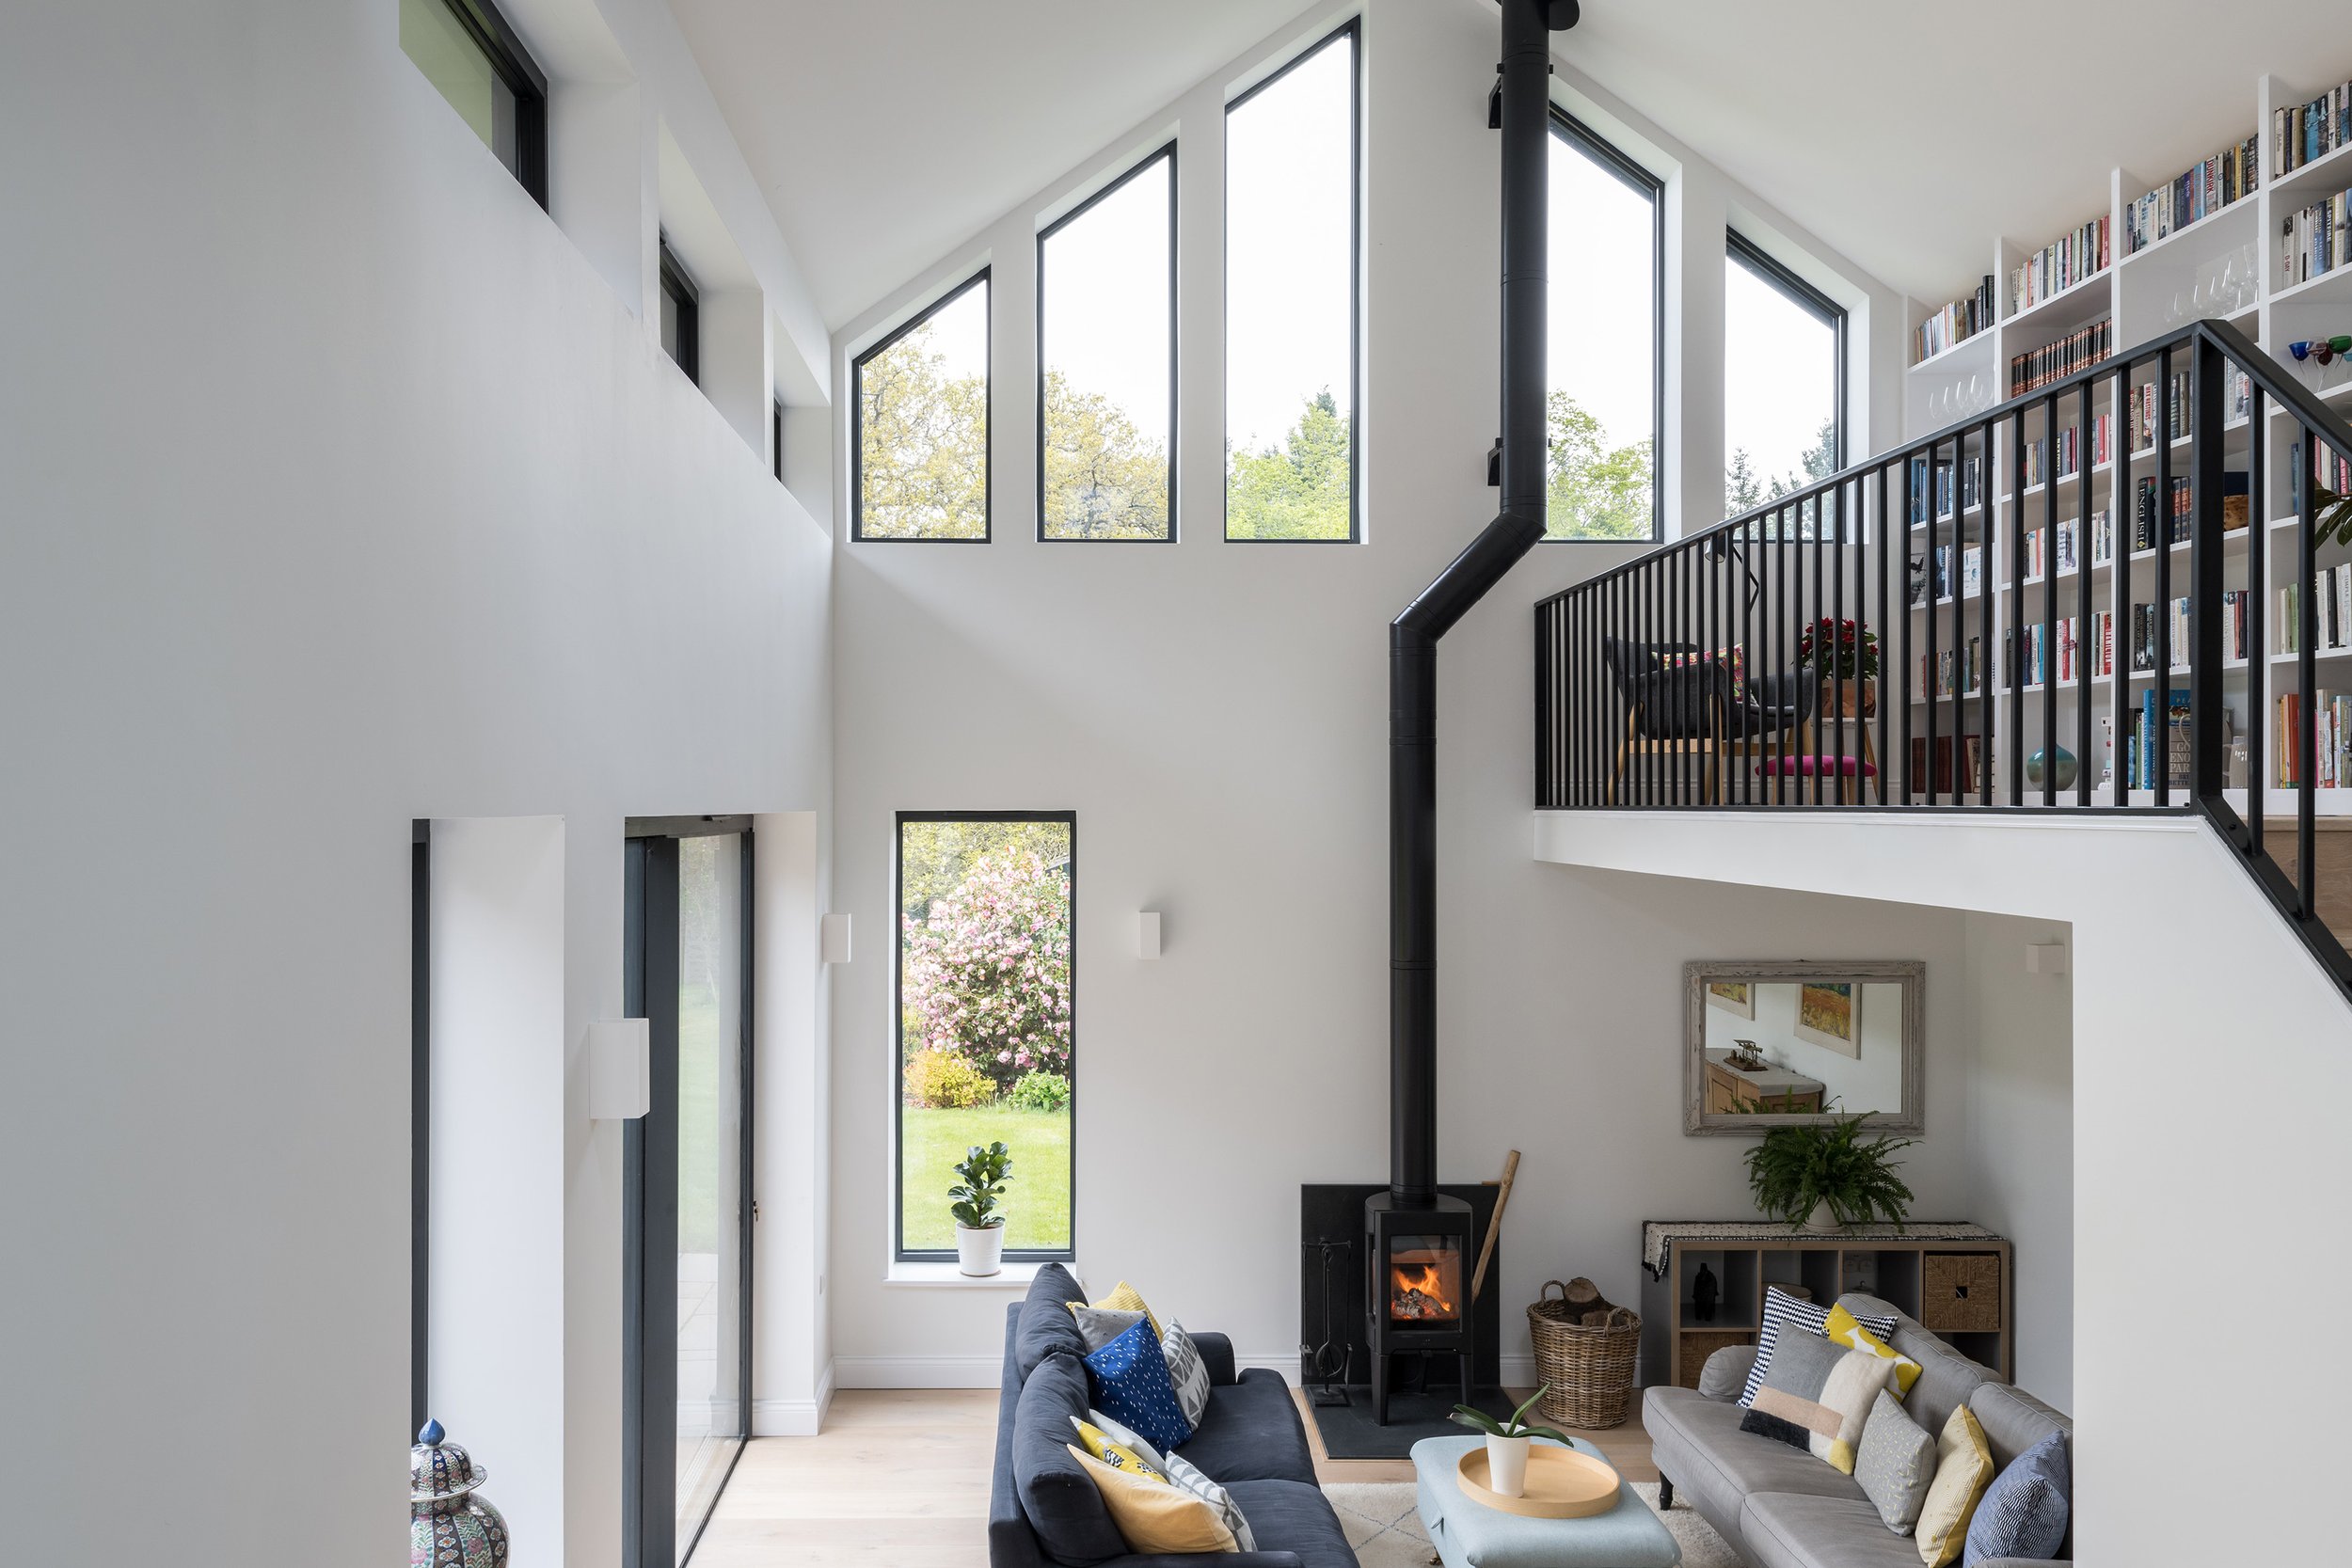 8-The-Pippins-Charred-Timber-House-Extension-Living-Room-Interior-Design-Architecture-London-Buckinghamshire-UK-Rider-Stirland-Architects.JPG